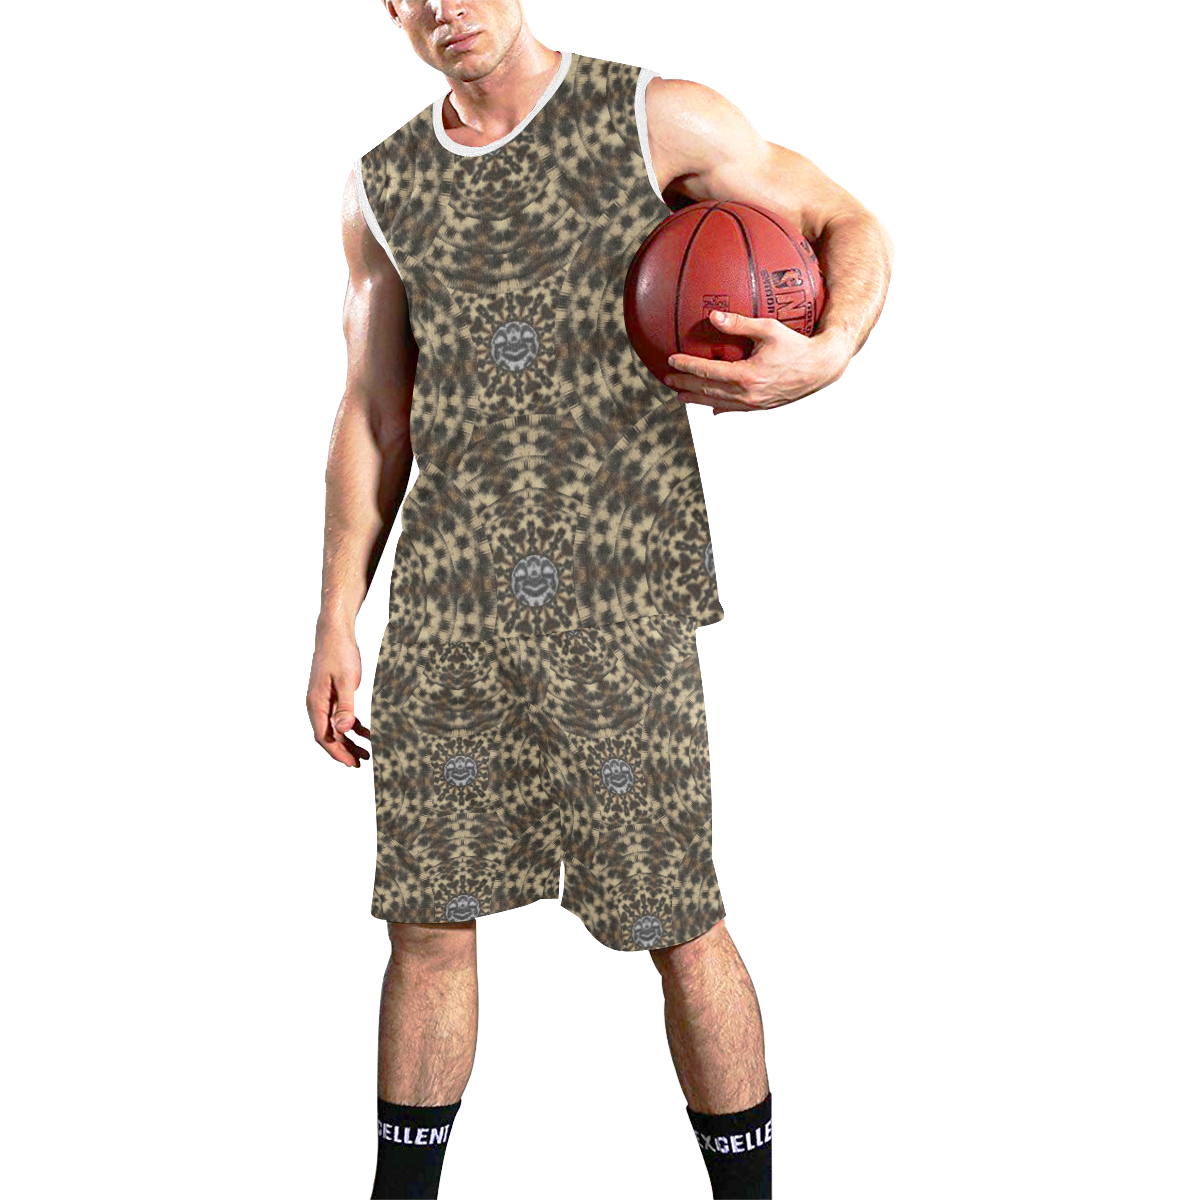 I am big cat with sweet catpaws decorative All Over Print Basketball Uniform